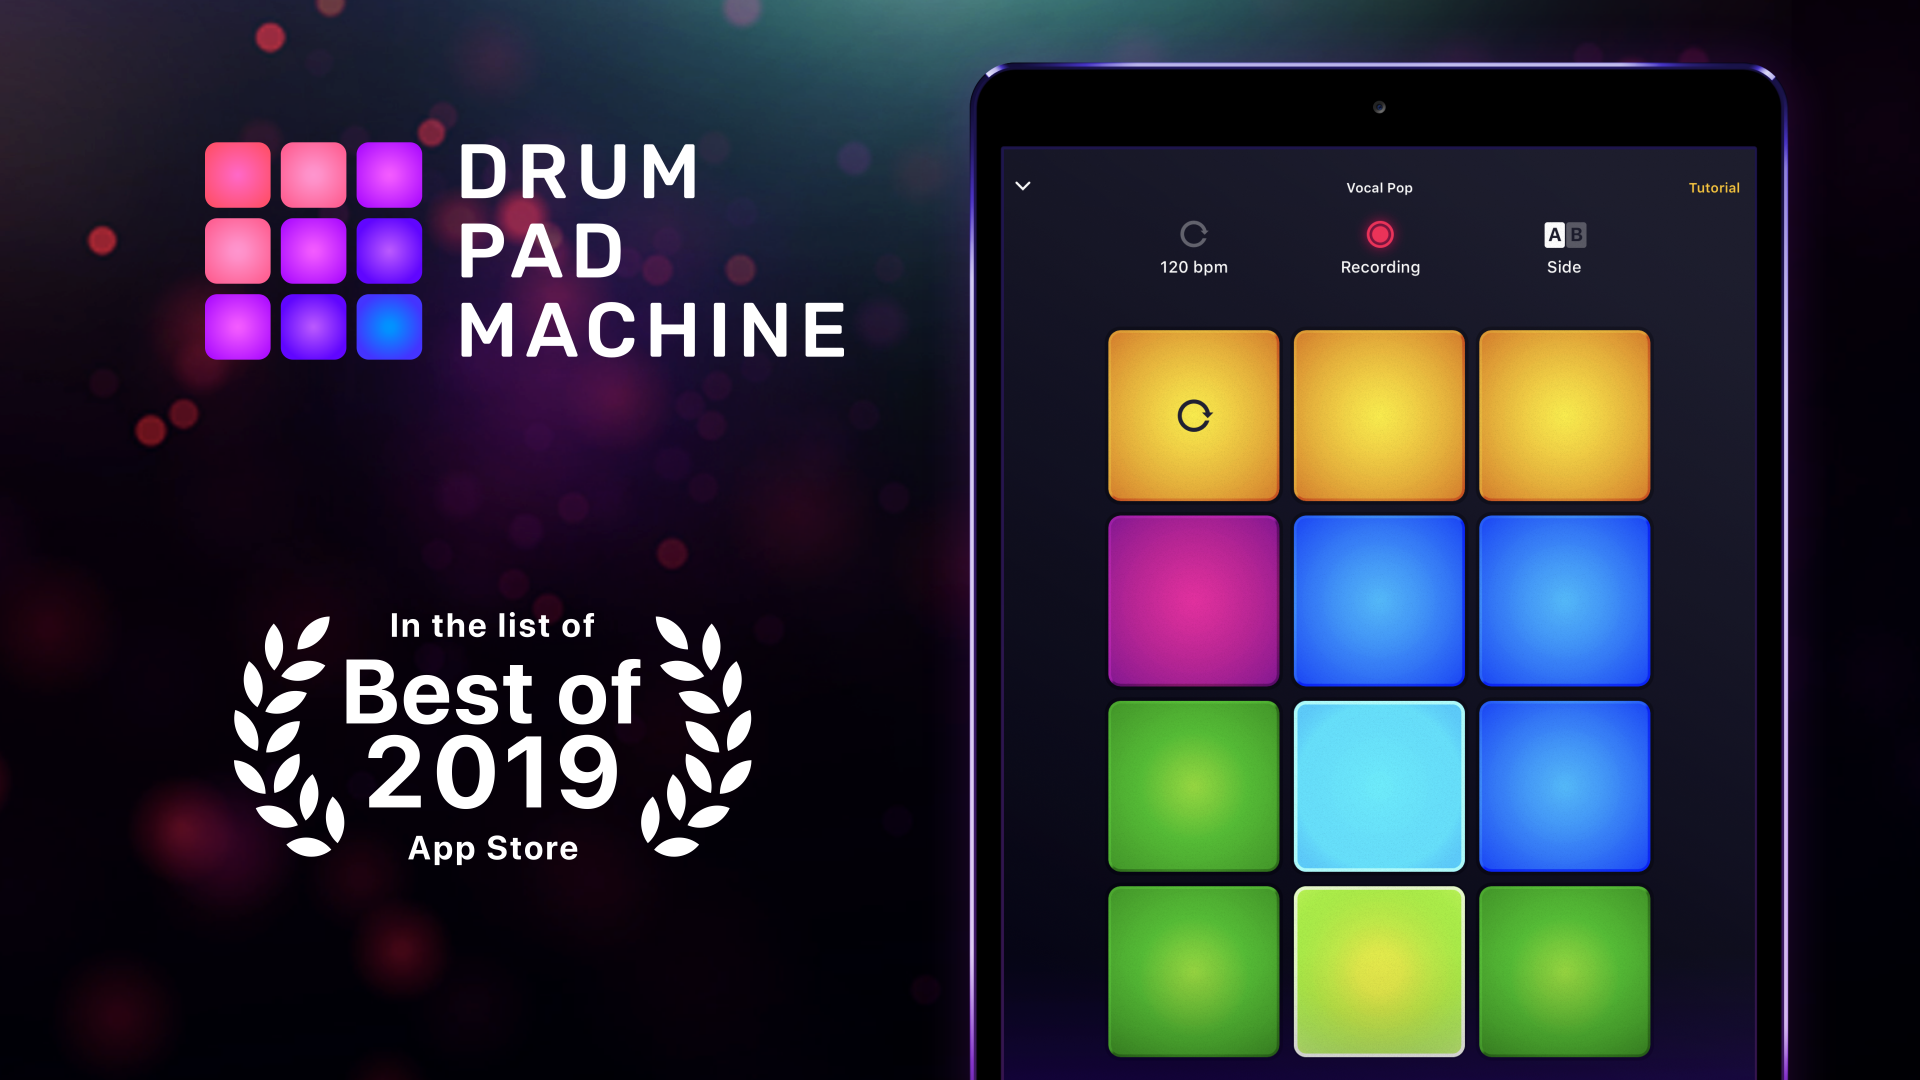 music apps are featured in Best of 2019